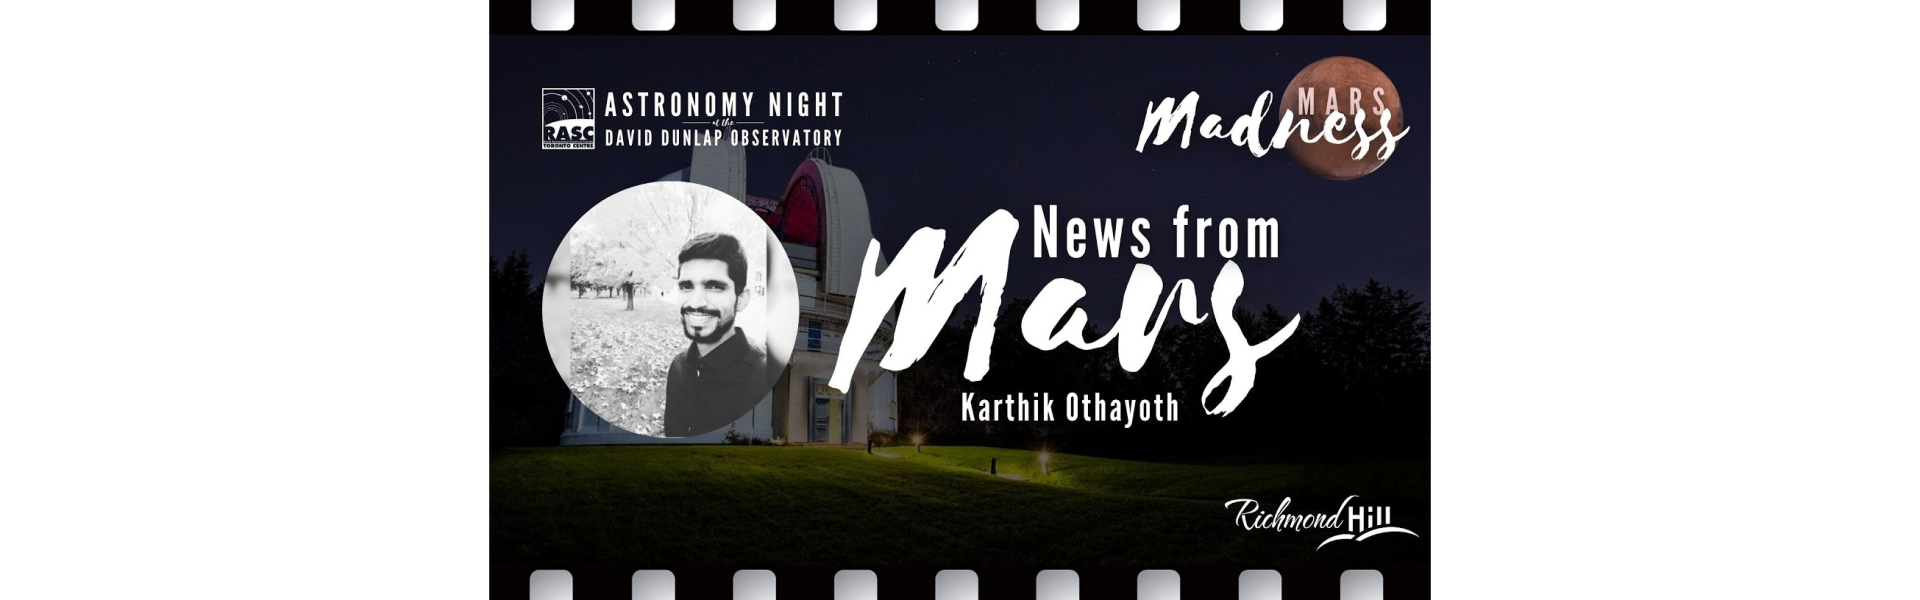 News from Mars with Karthik Othayoth